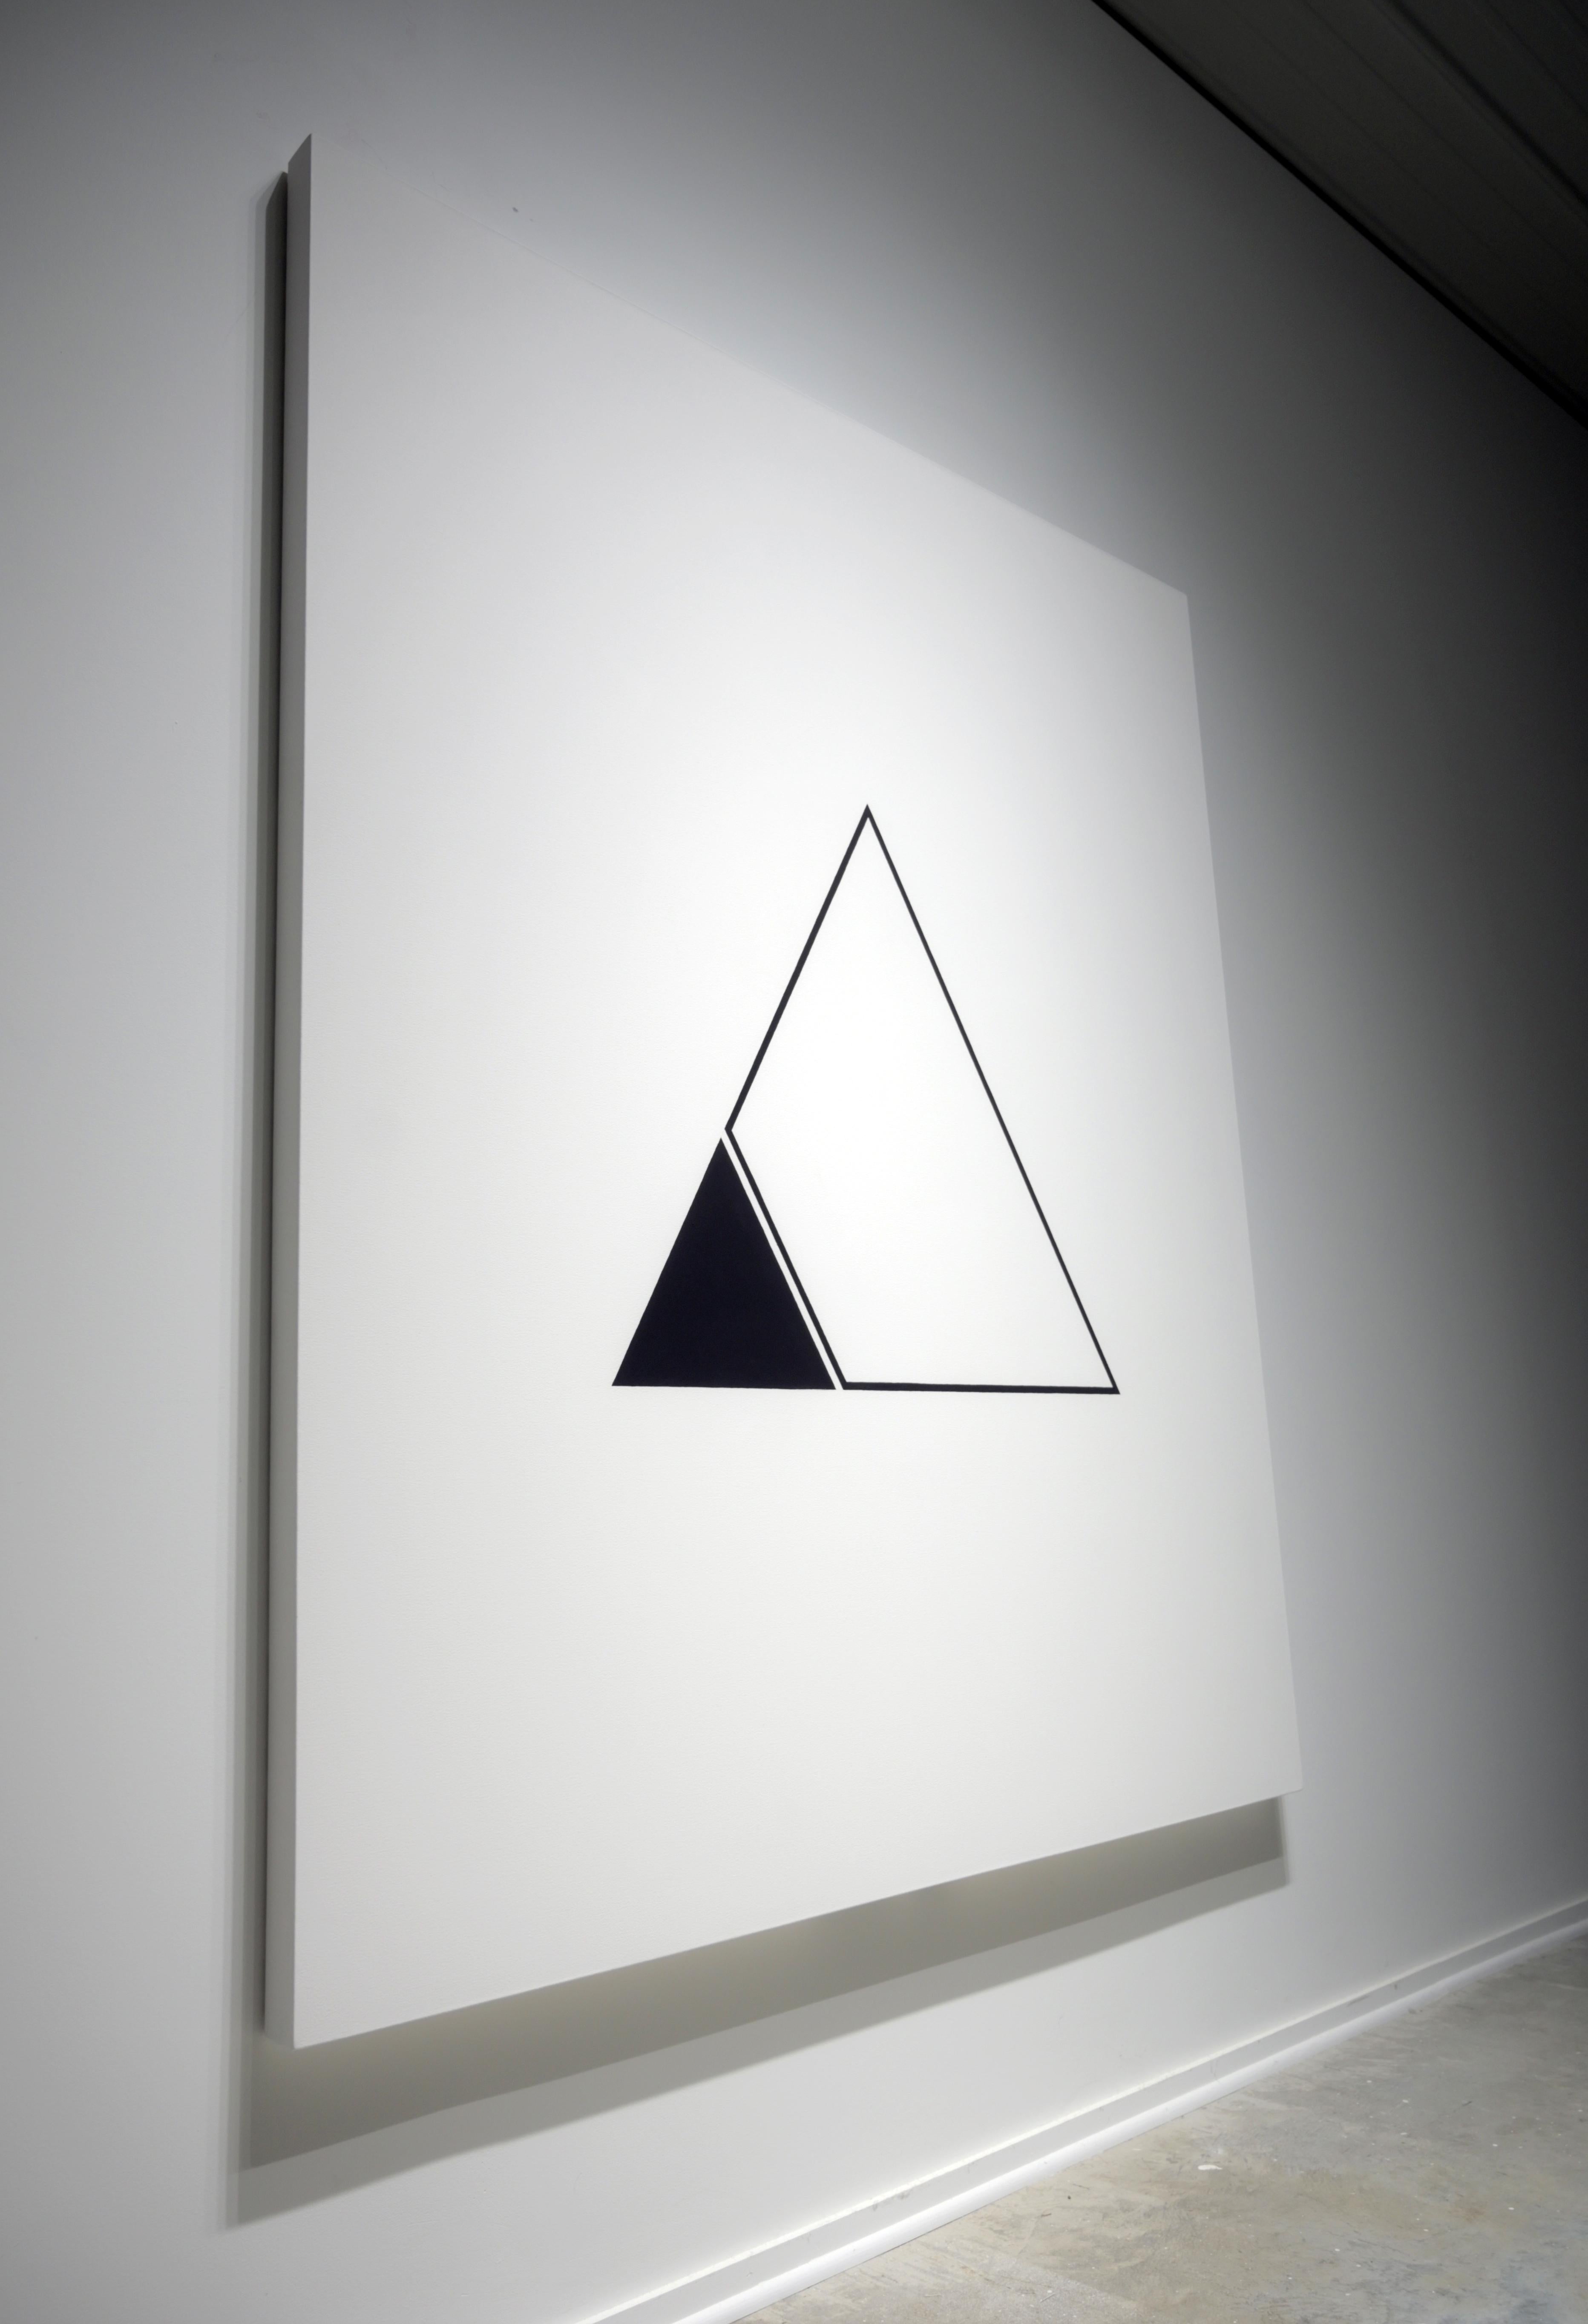 <p>Artist Comments<br>In this large composition, artist John Diehl crafts a monolithic piece using the Pythagorean theorem and advanced light-absorbing paint. While its elegance is apparent from a distance, a closer inspection reveals subtle pencil